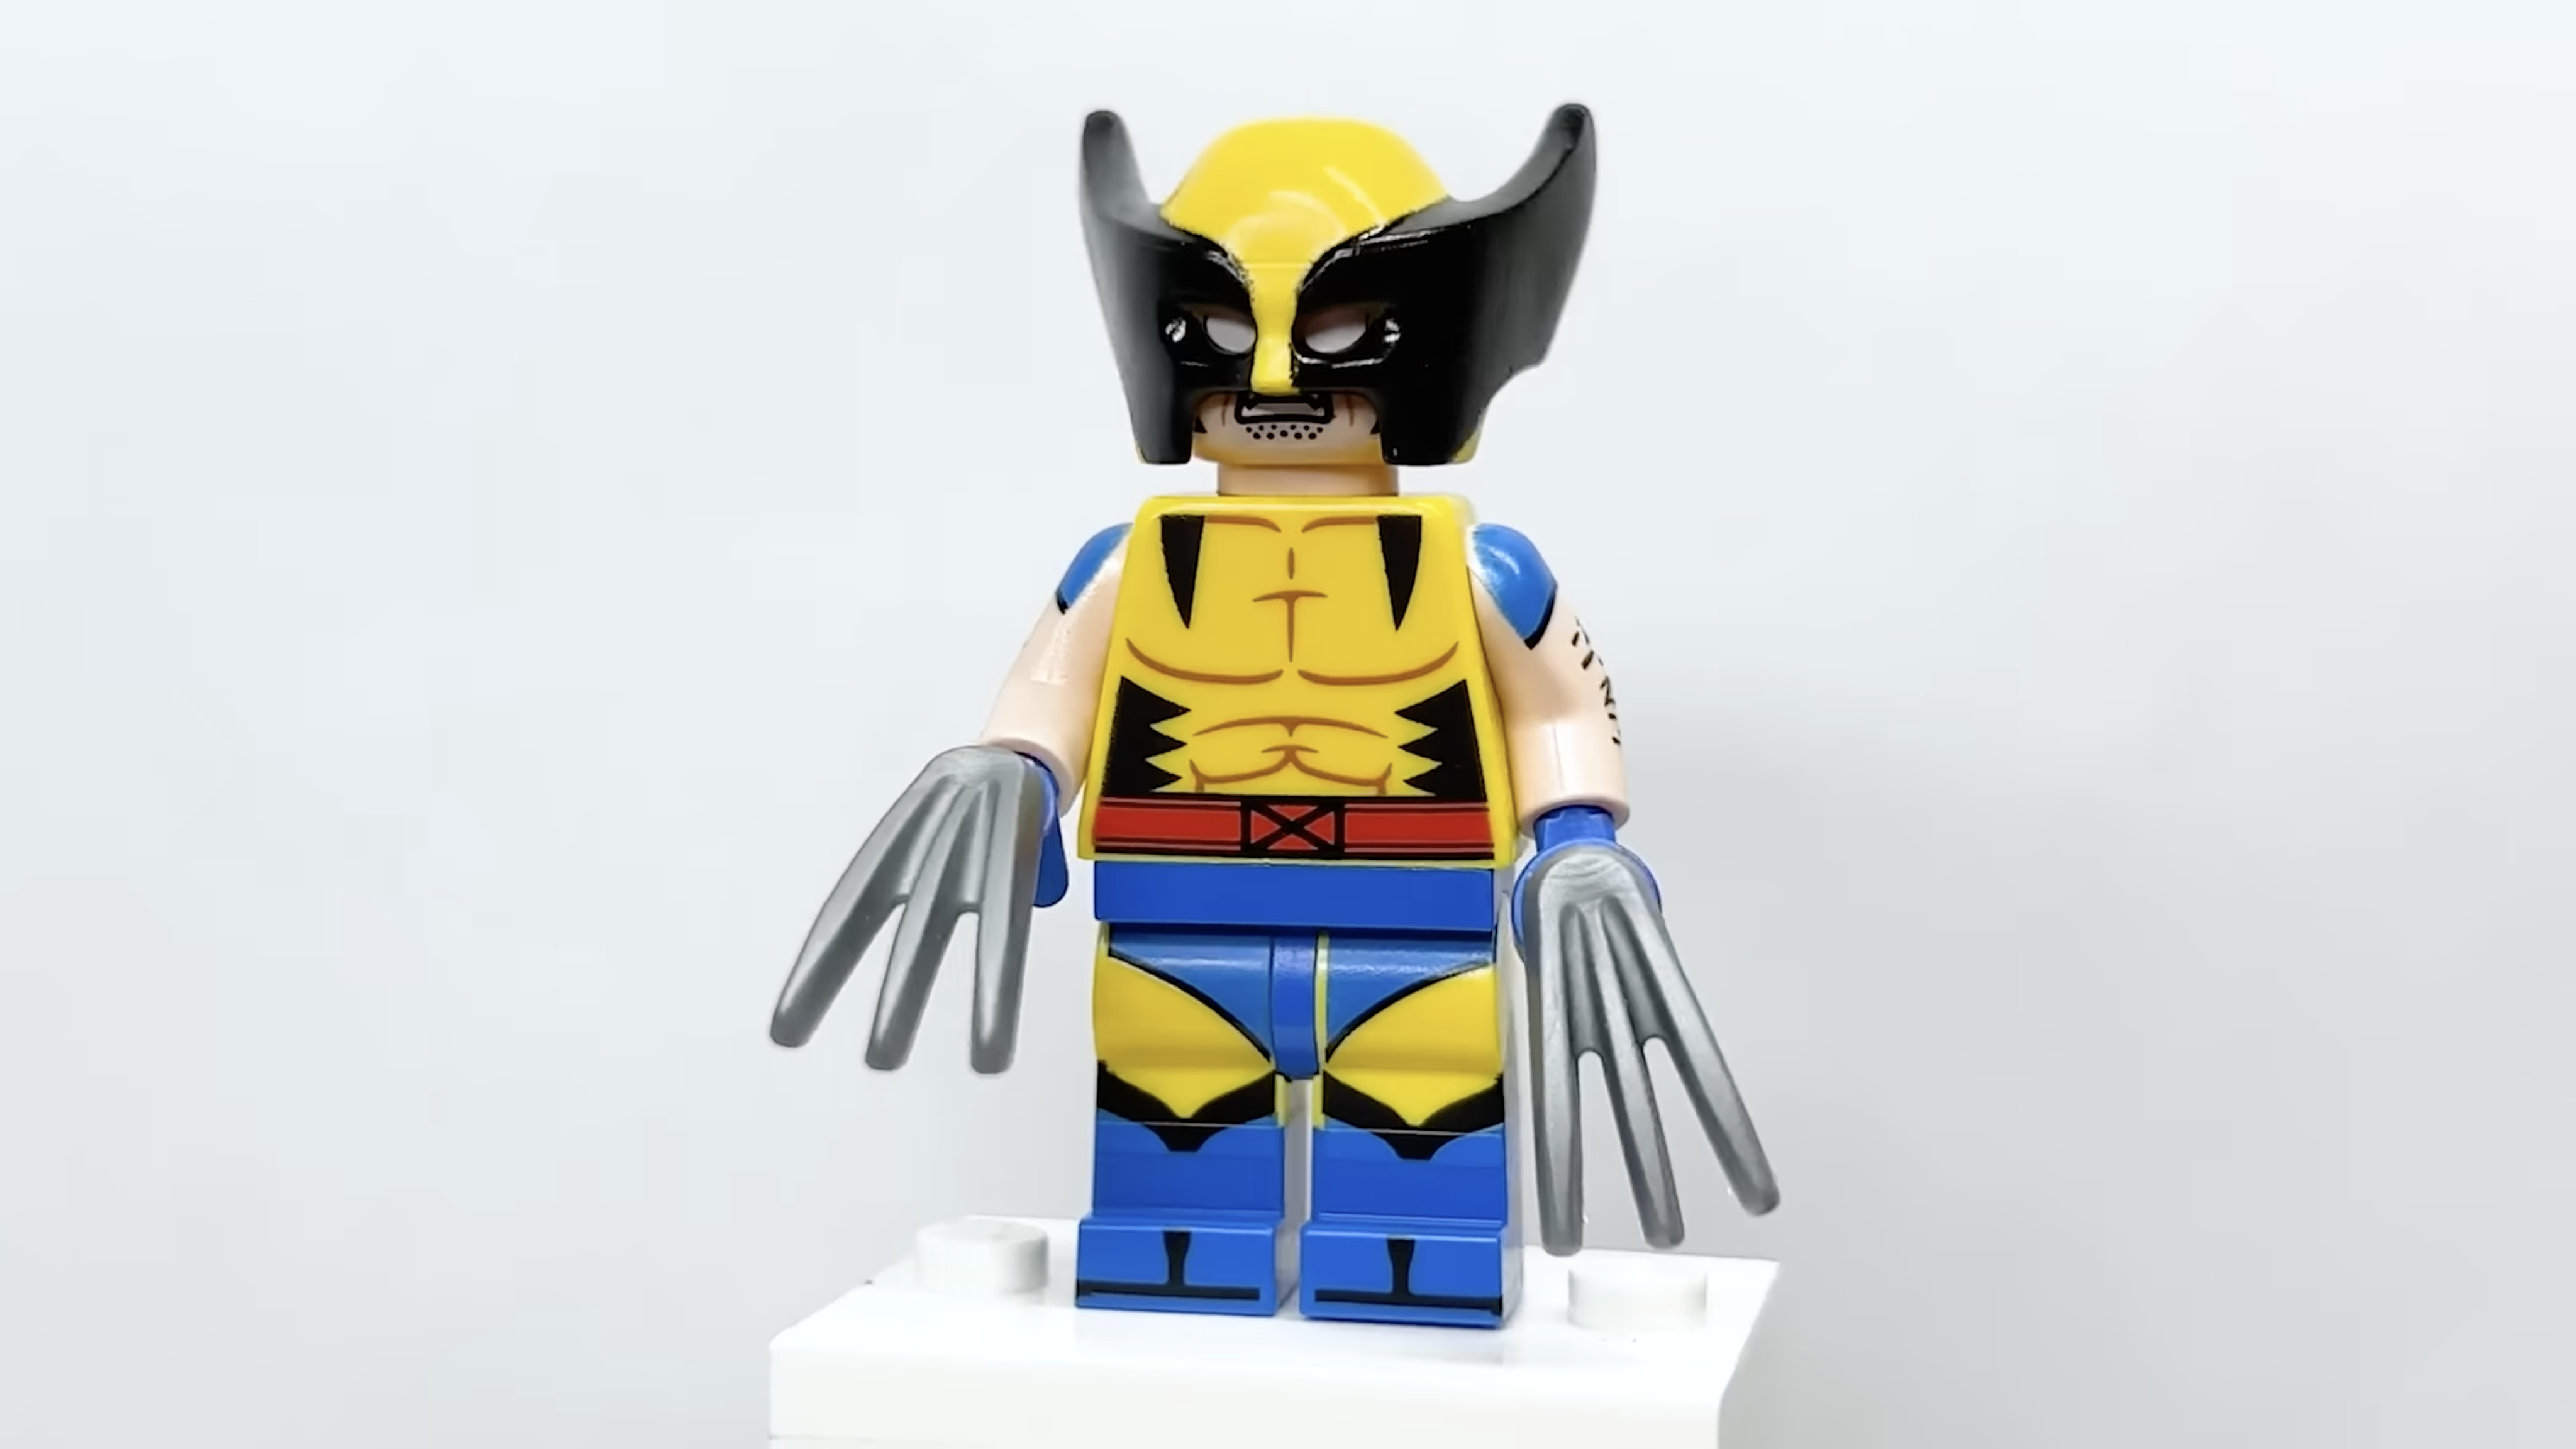 LEGO 71039 Marvel Studios Collectable Minifigures Series 2 review